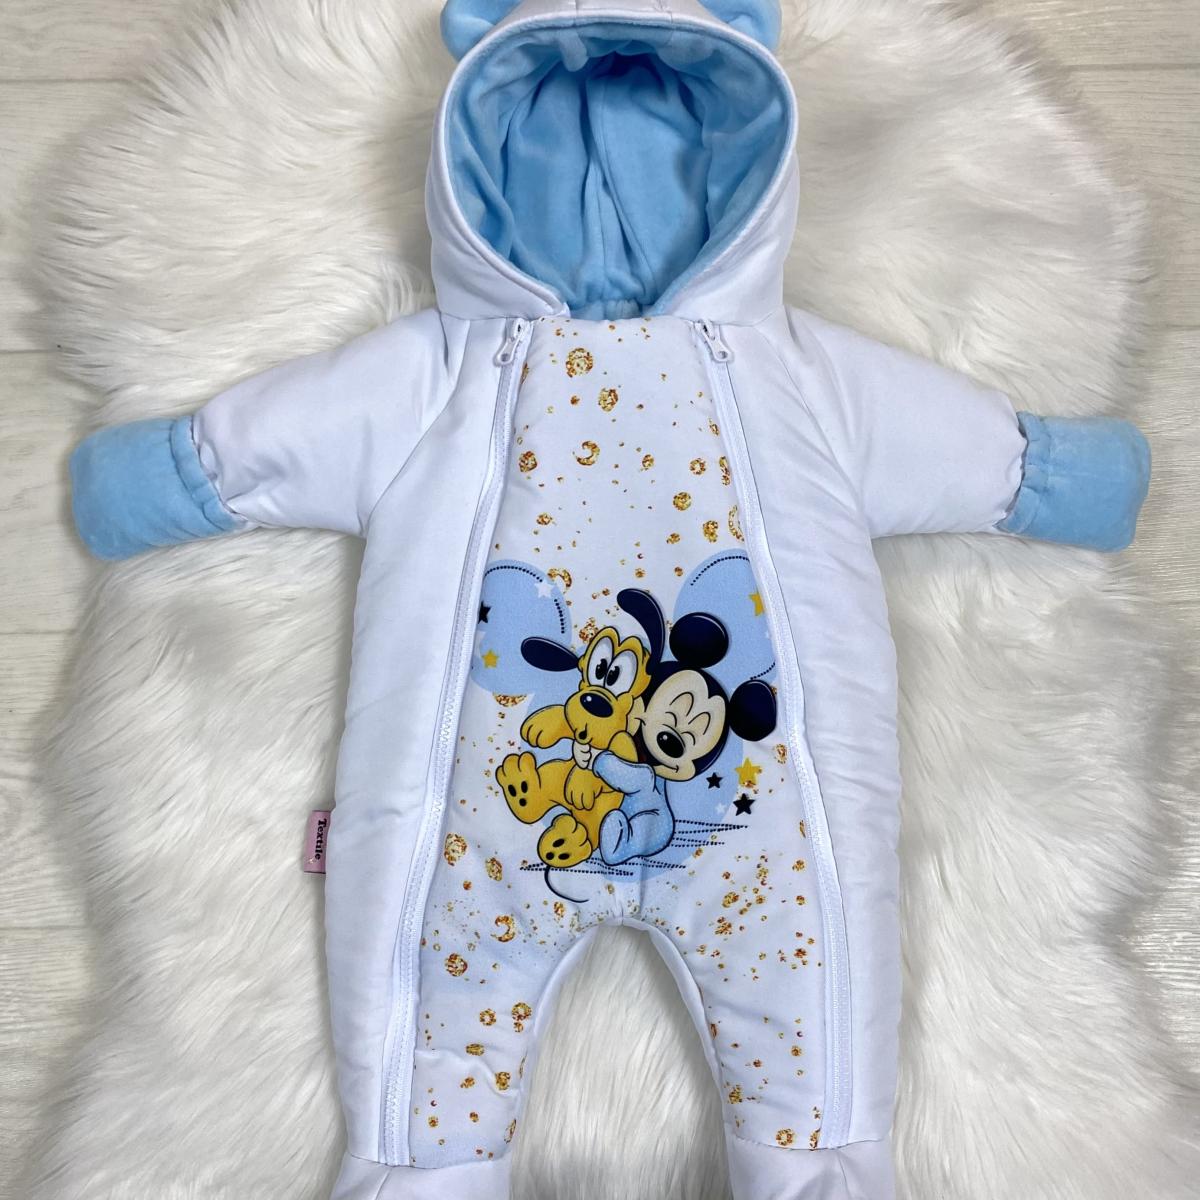 Winter onesie with Mickey and pluto graphics